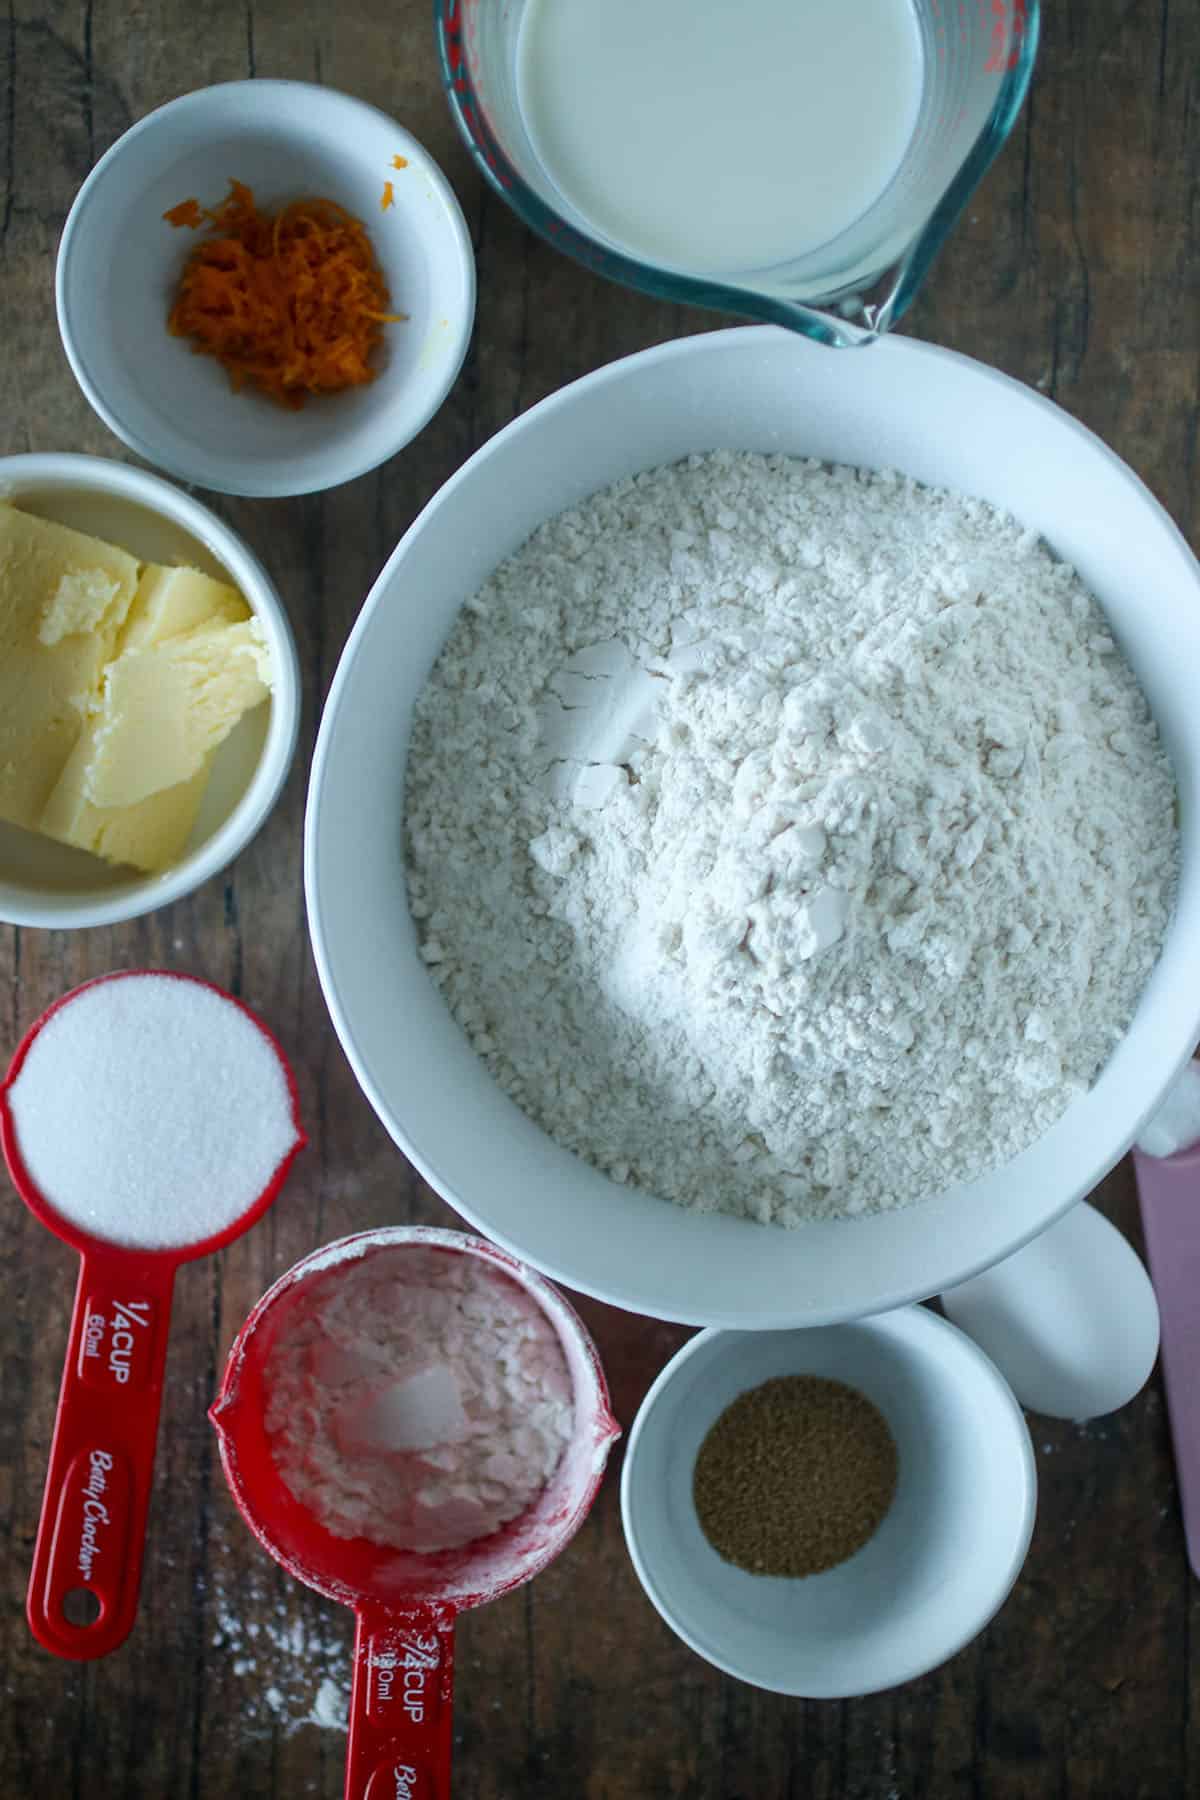 The ingredients for the dough.